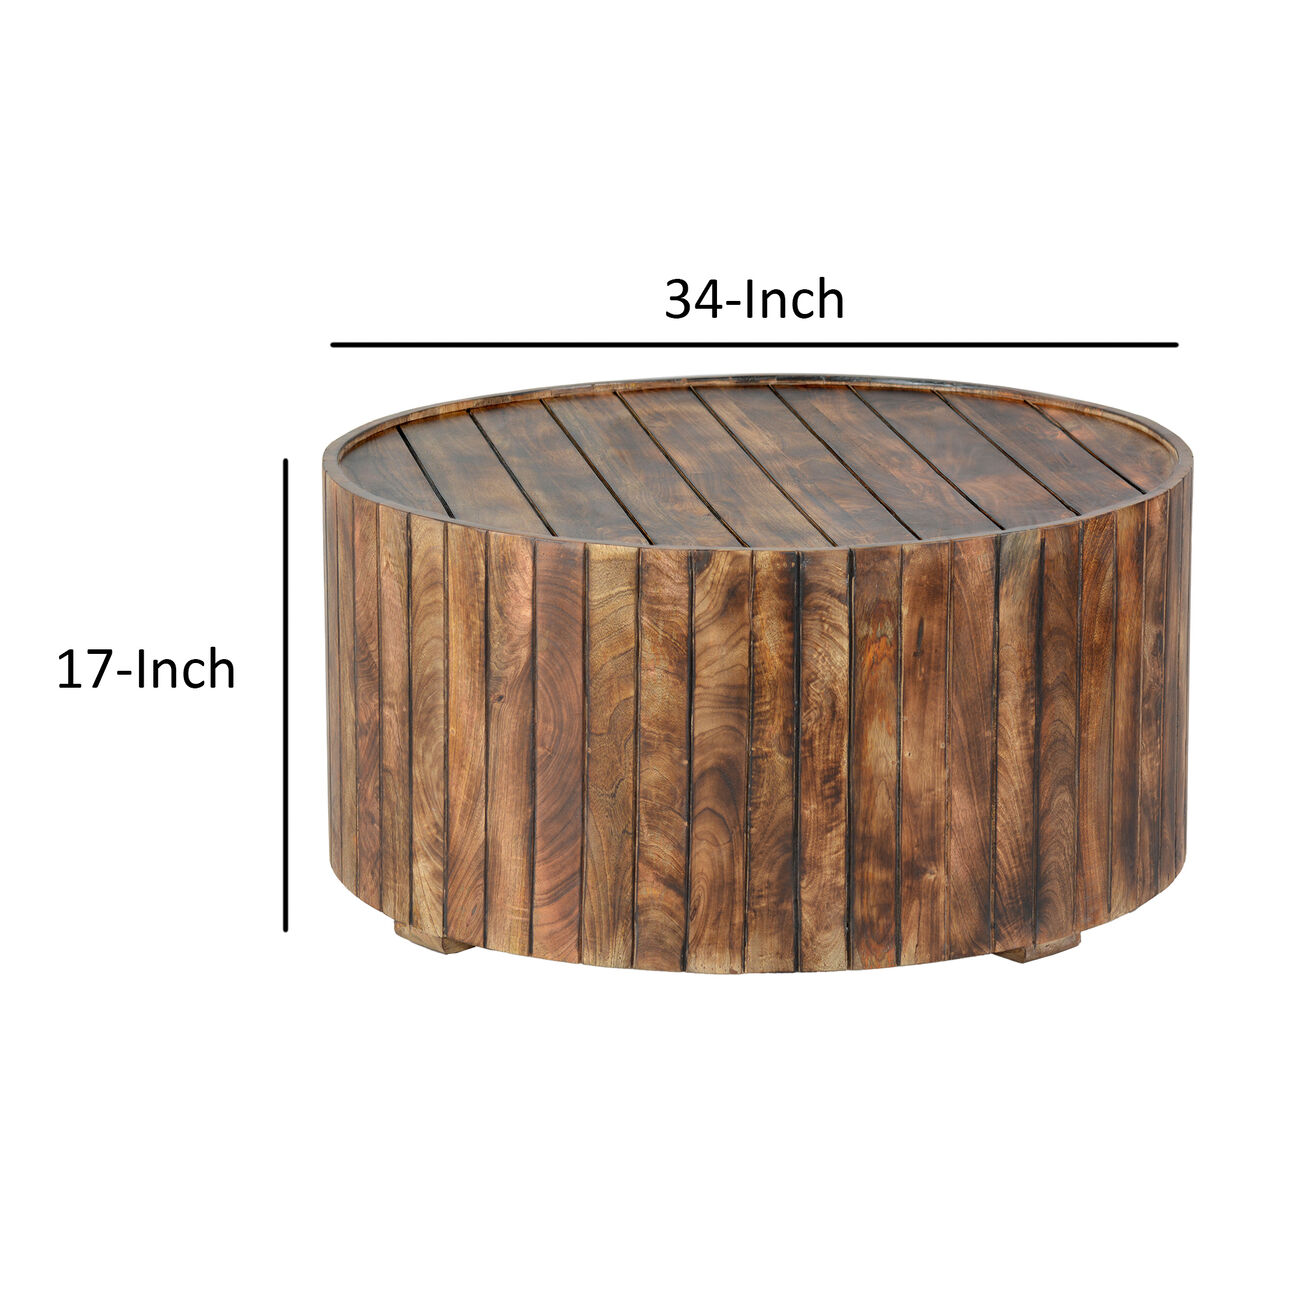 34 Inch Handmade Wooden Round Coffee Table with Plank Design, Burned Brown